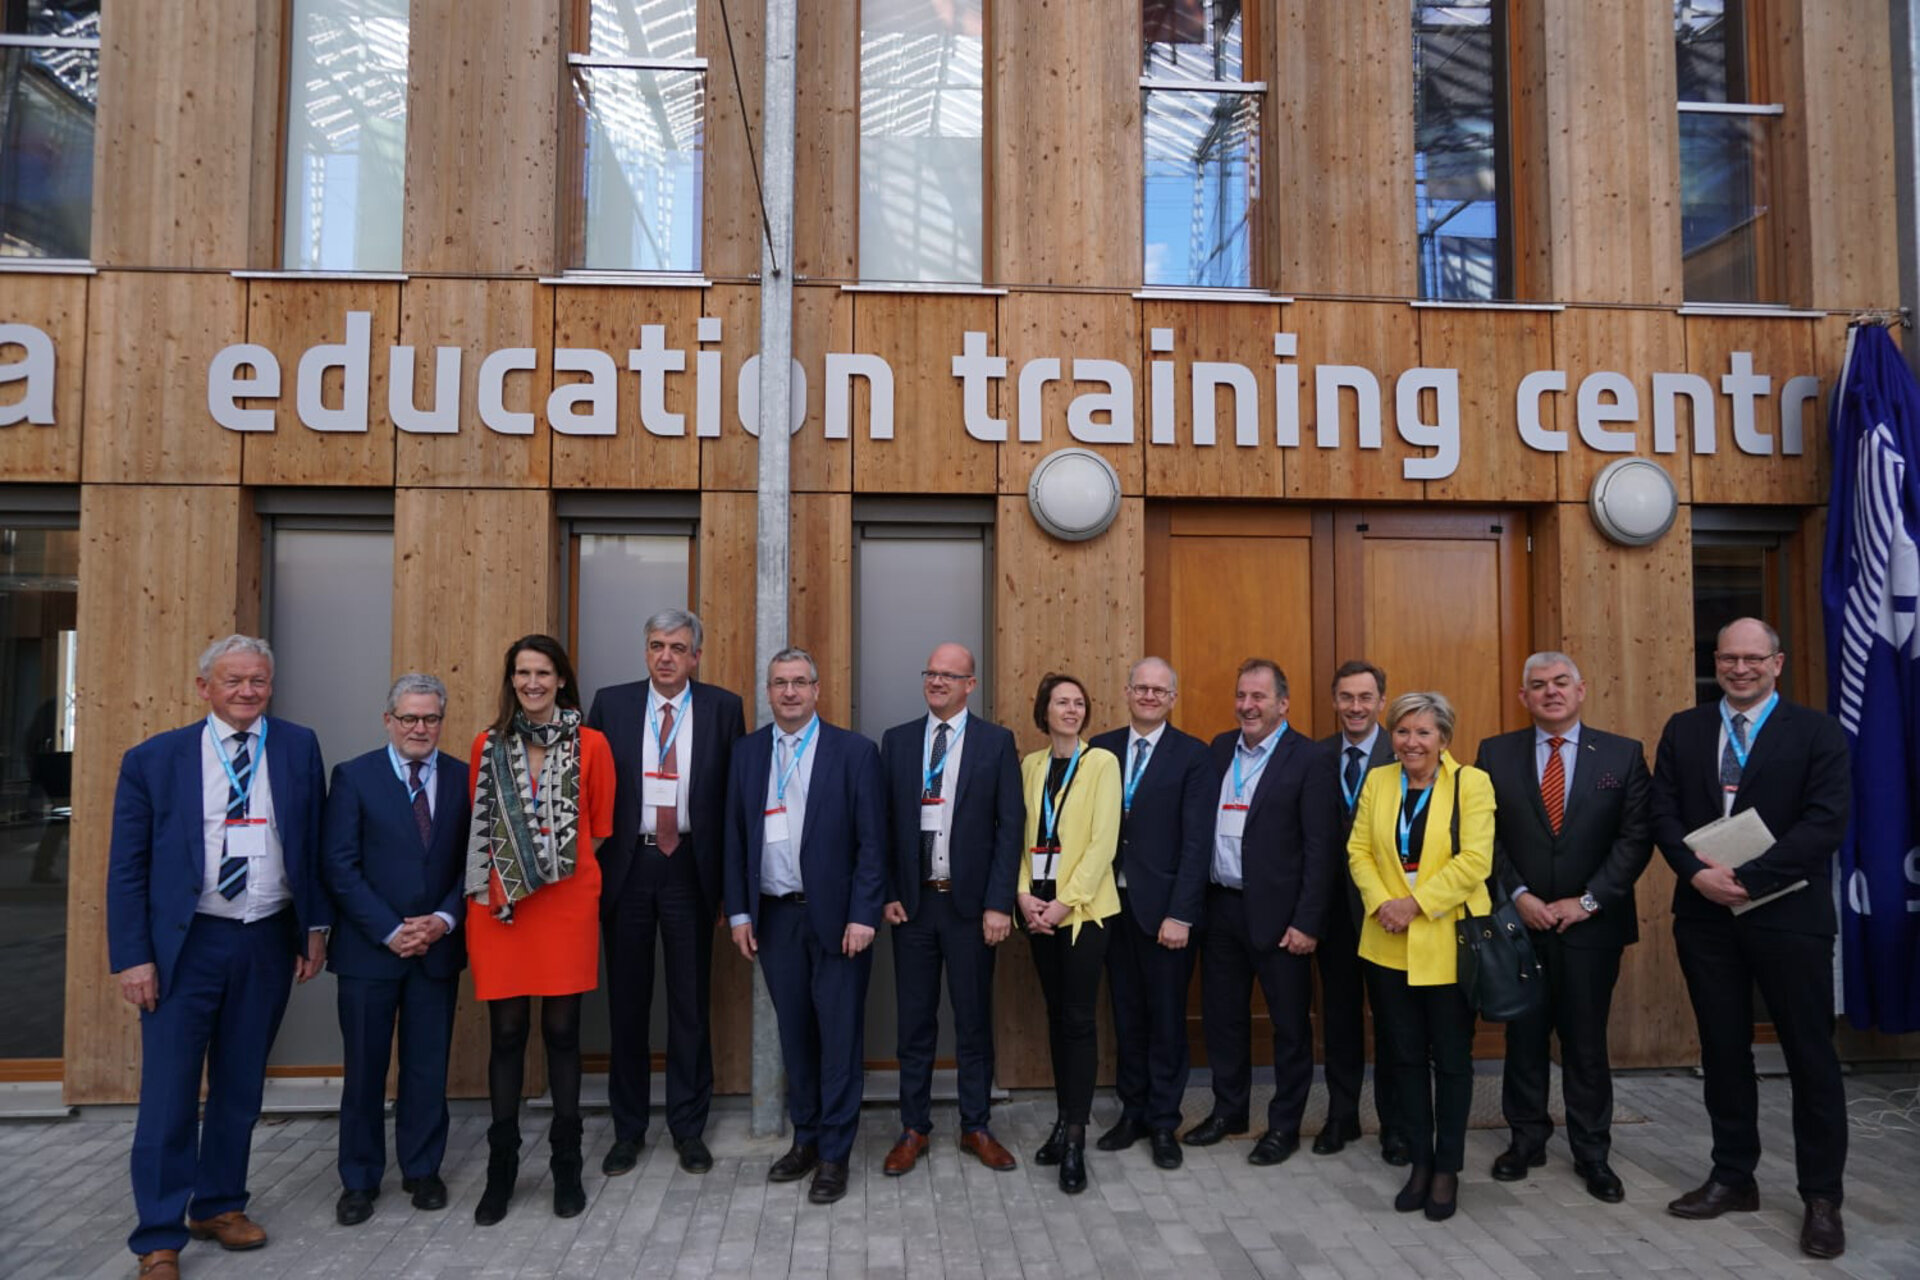 The ESA Education Training Centre at ESEC-Galaxia is inaugurated